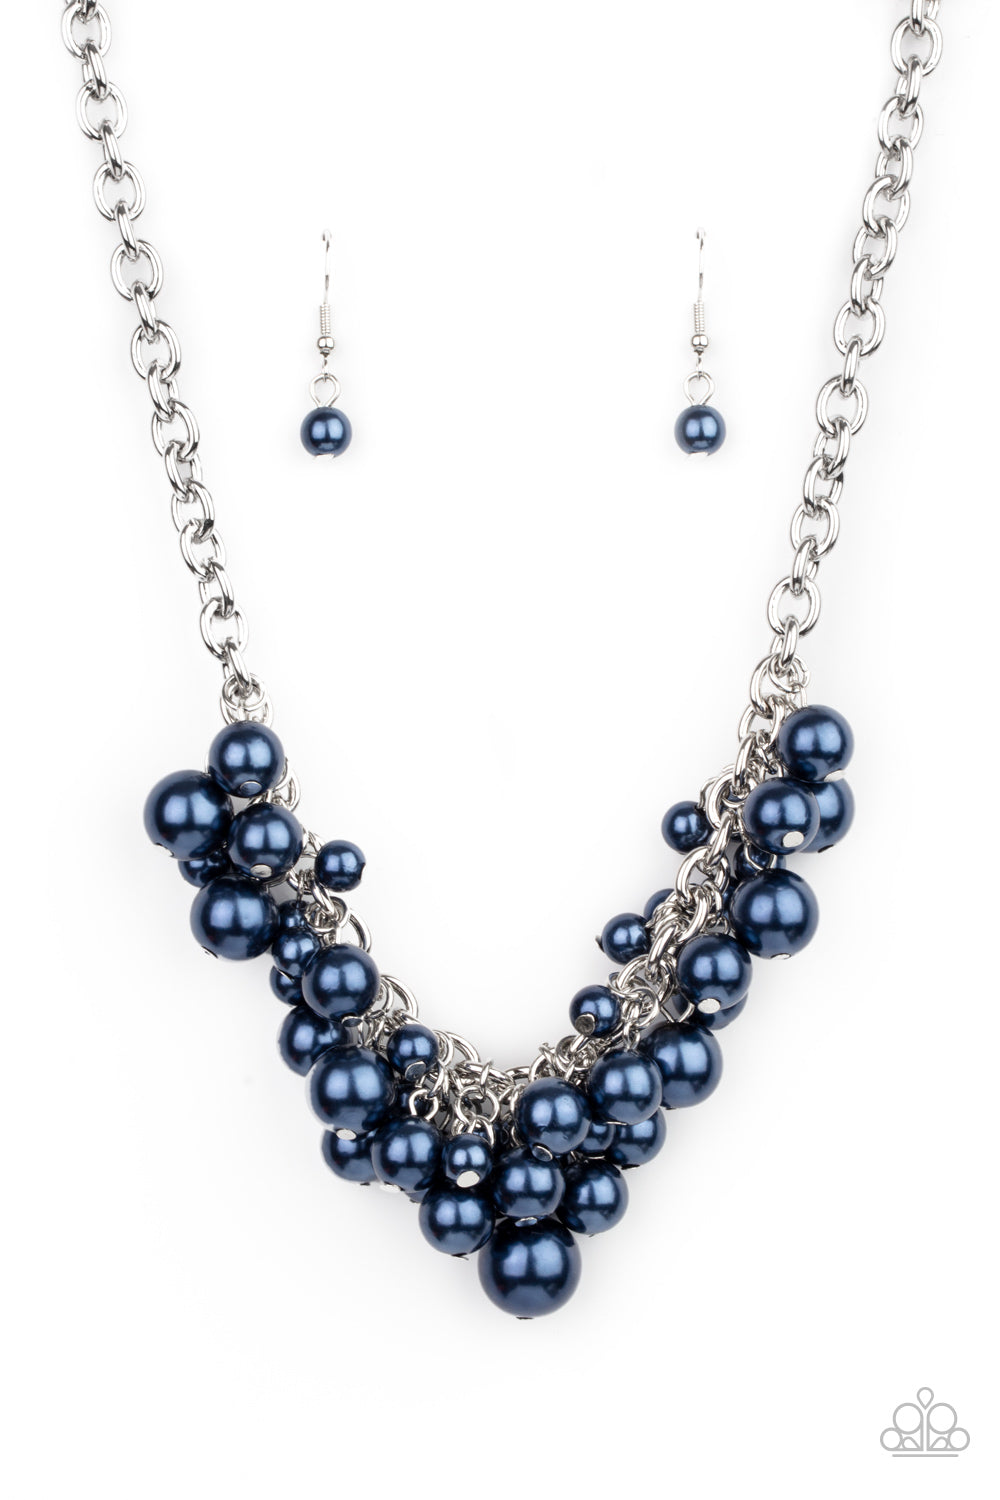 Down For The COUNTESS - Blue necklace